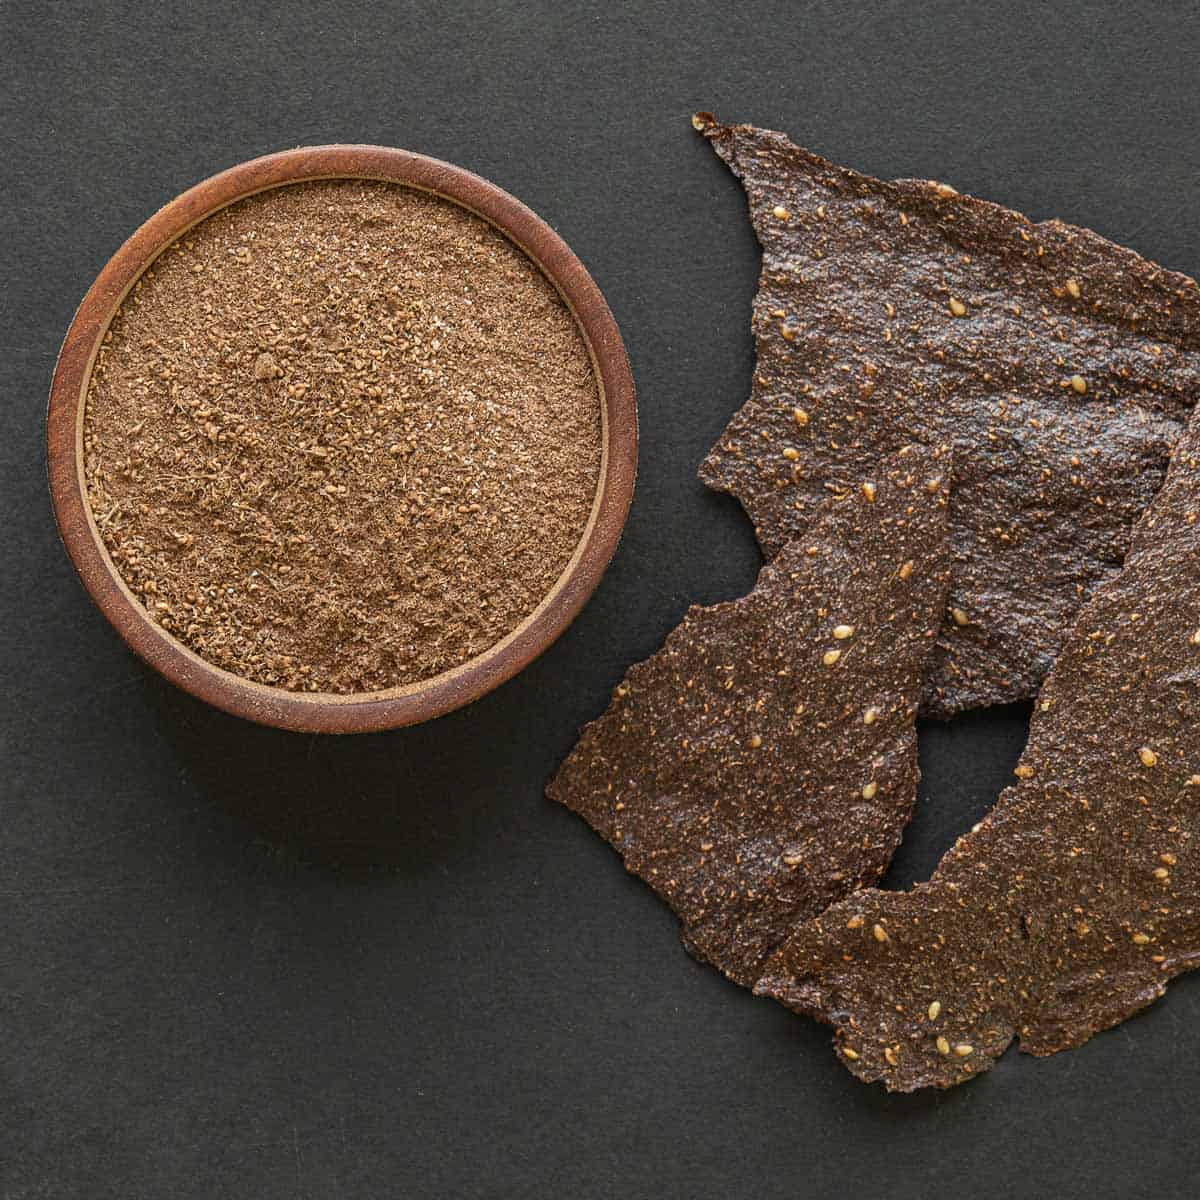 Dock seed flour crackers next to a bowl of ground dock flour on a black background. 